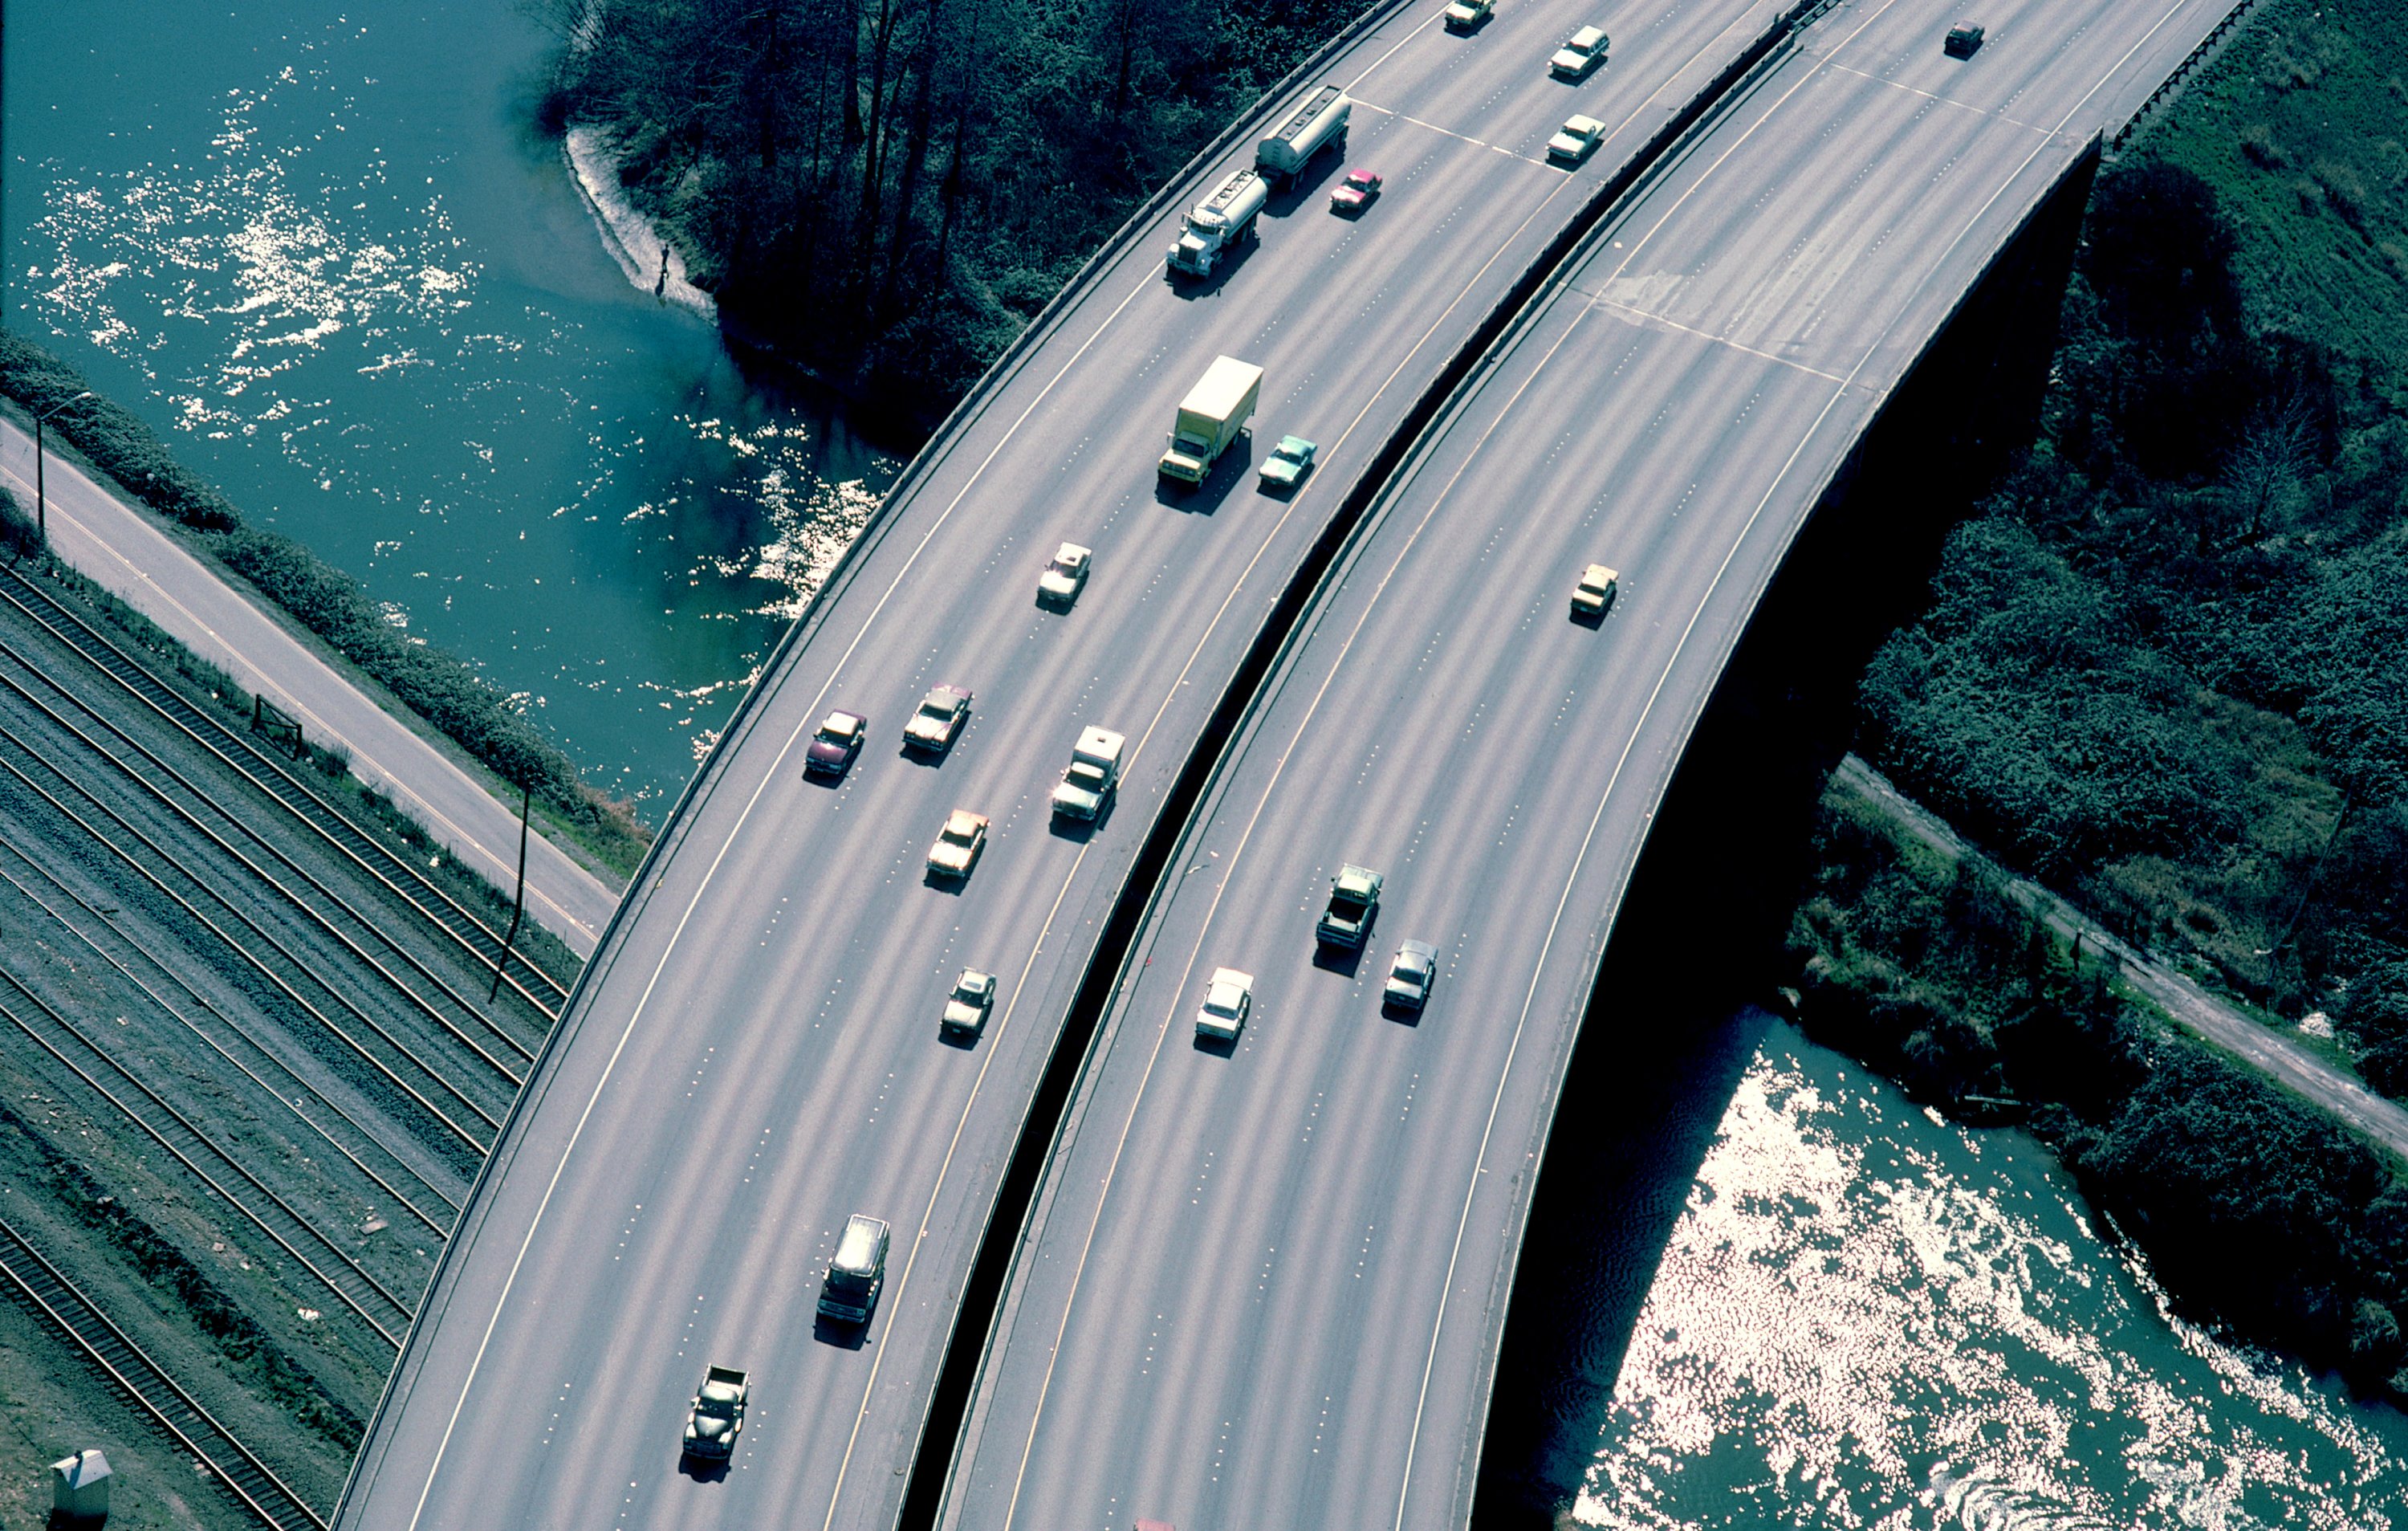 An aerial view of vehicles on a freeway bridge passing over a river.